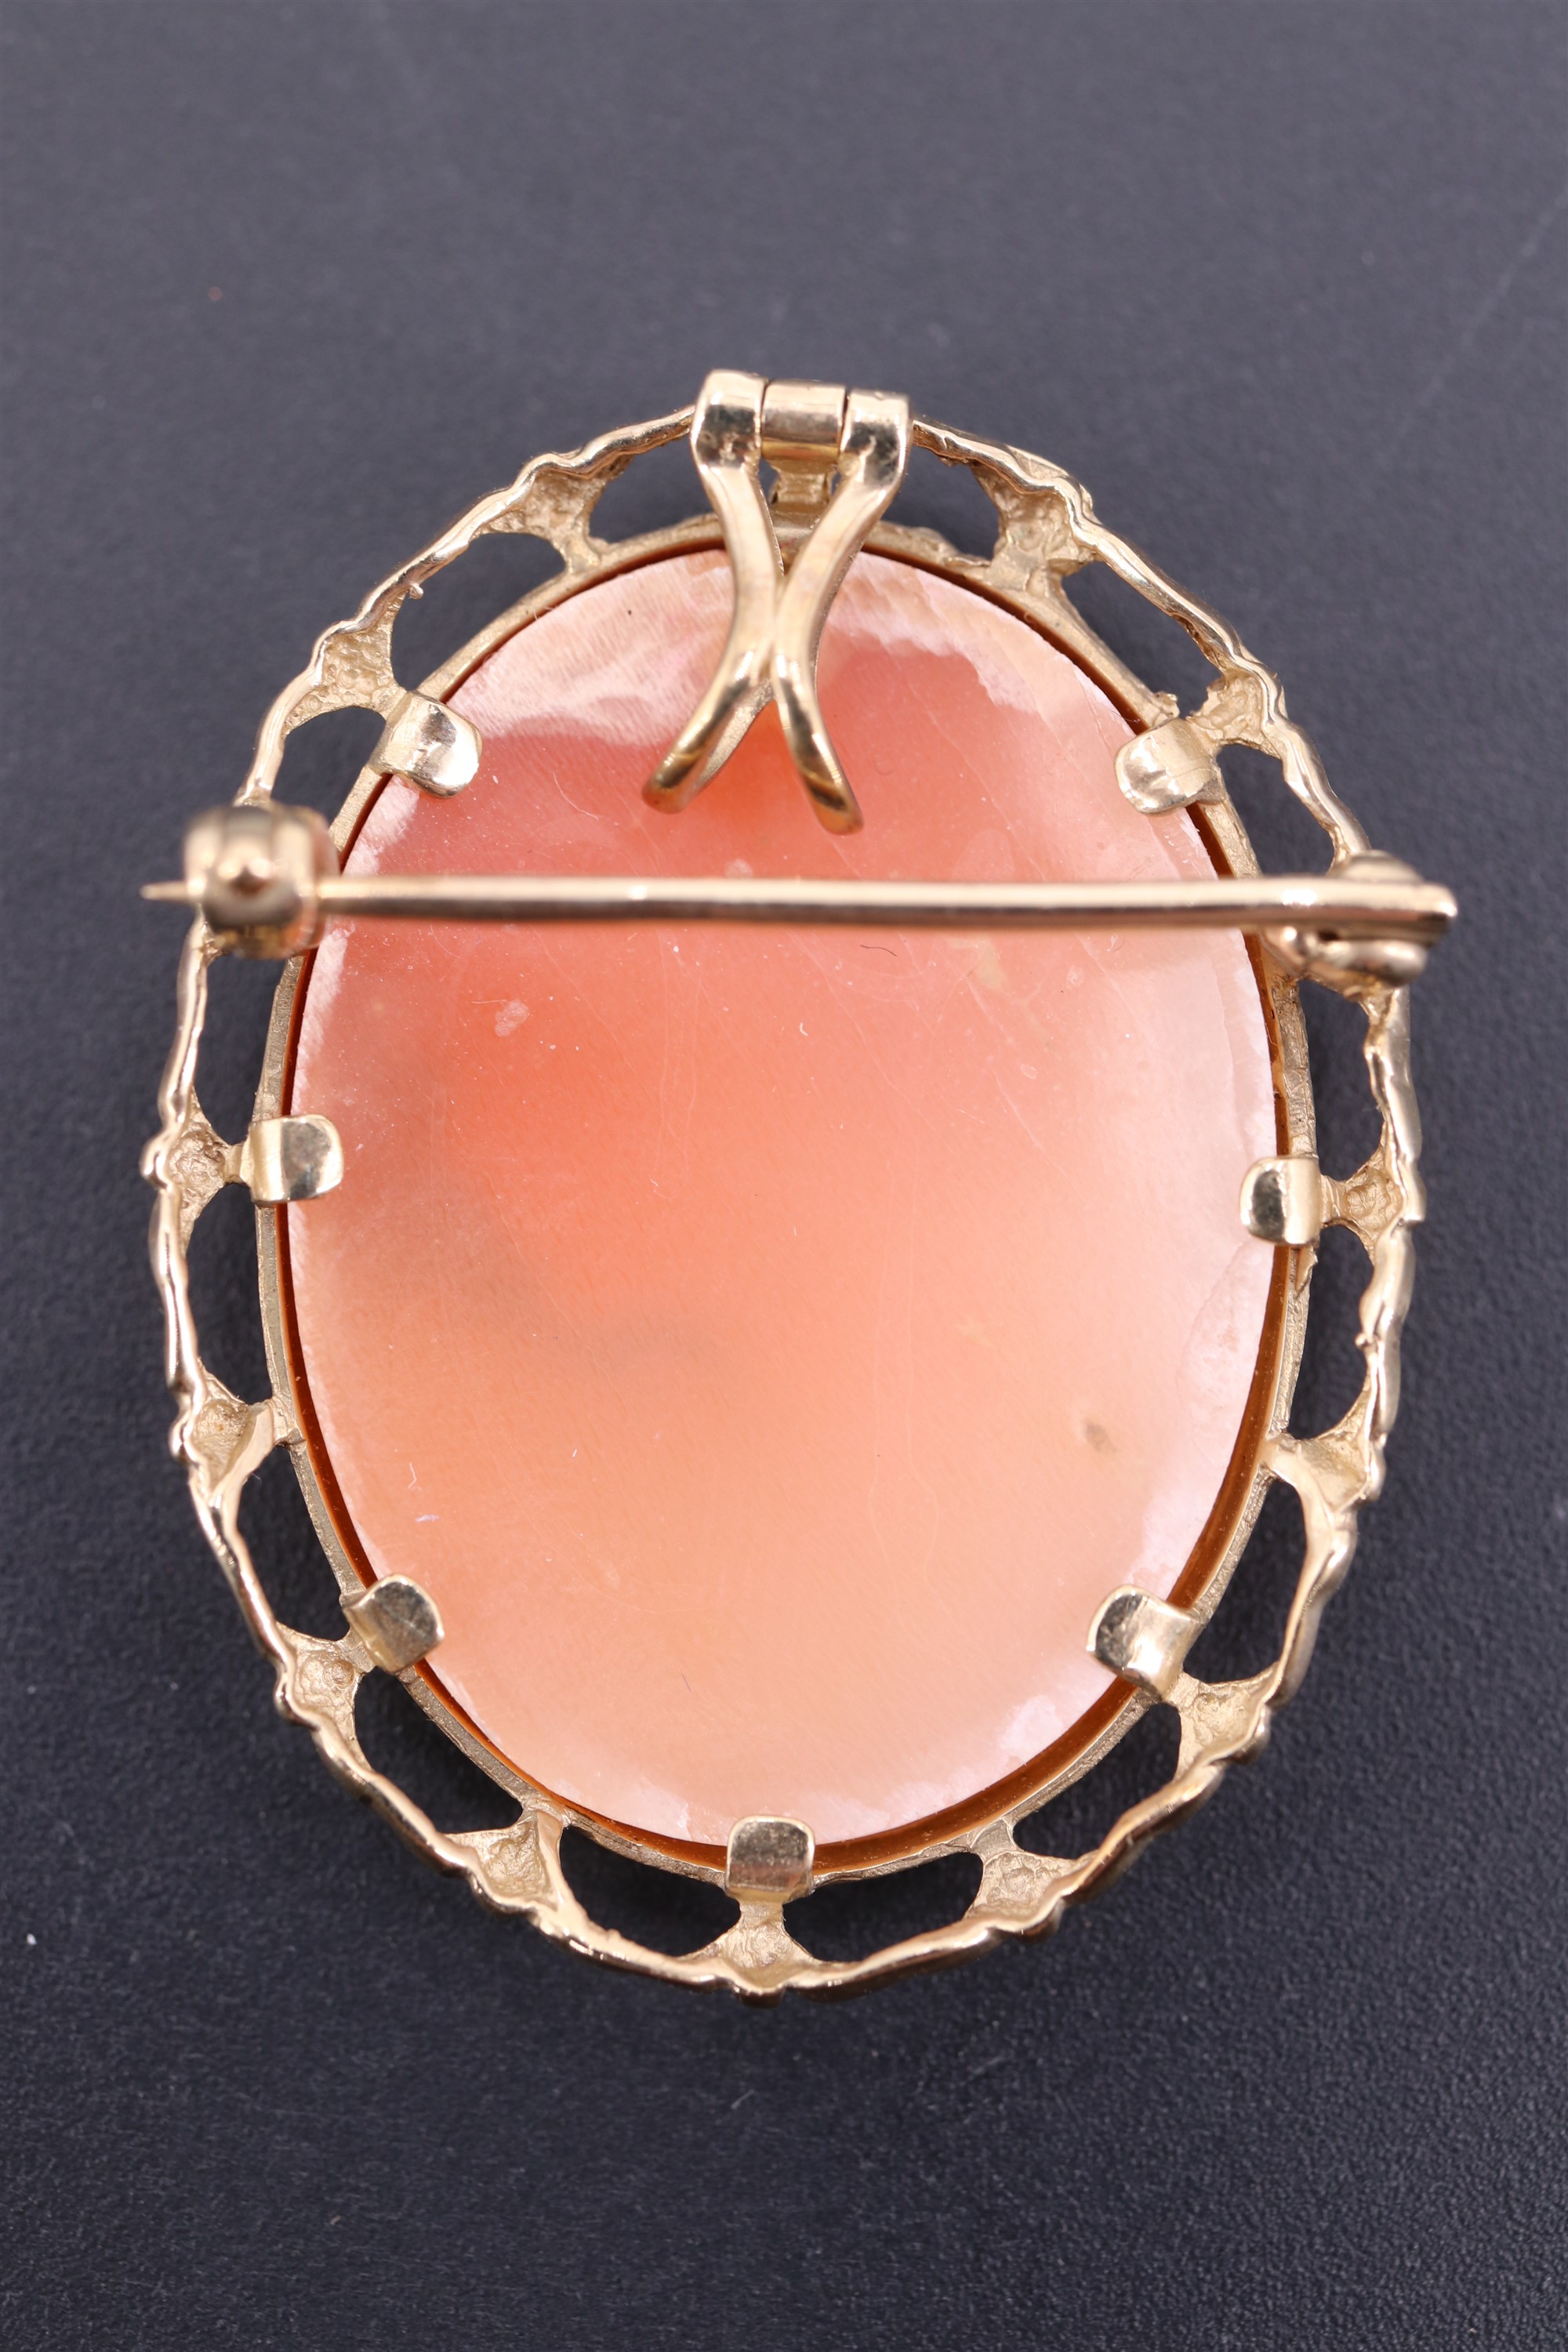 A 9 ct gold mounted shell cameo brooch, circa 1970s, (assay marks indistinct), 35 mm x 27 mm, 7.9 g - Image 2 of 3